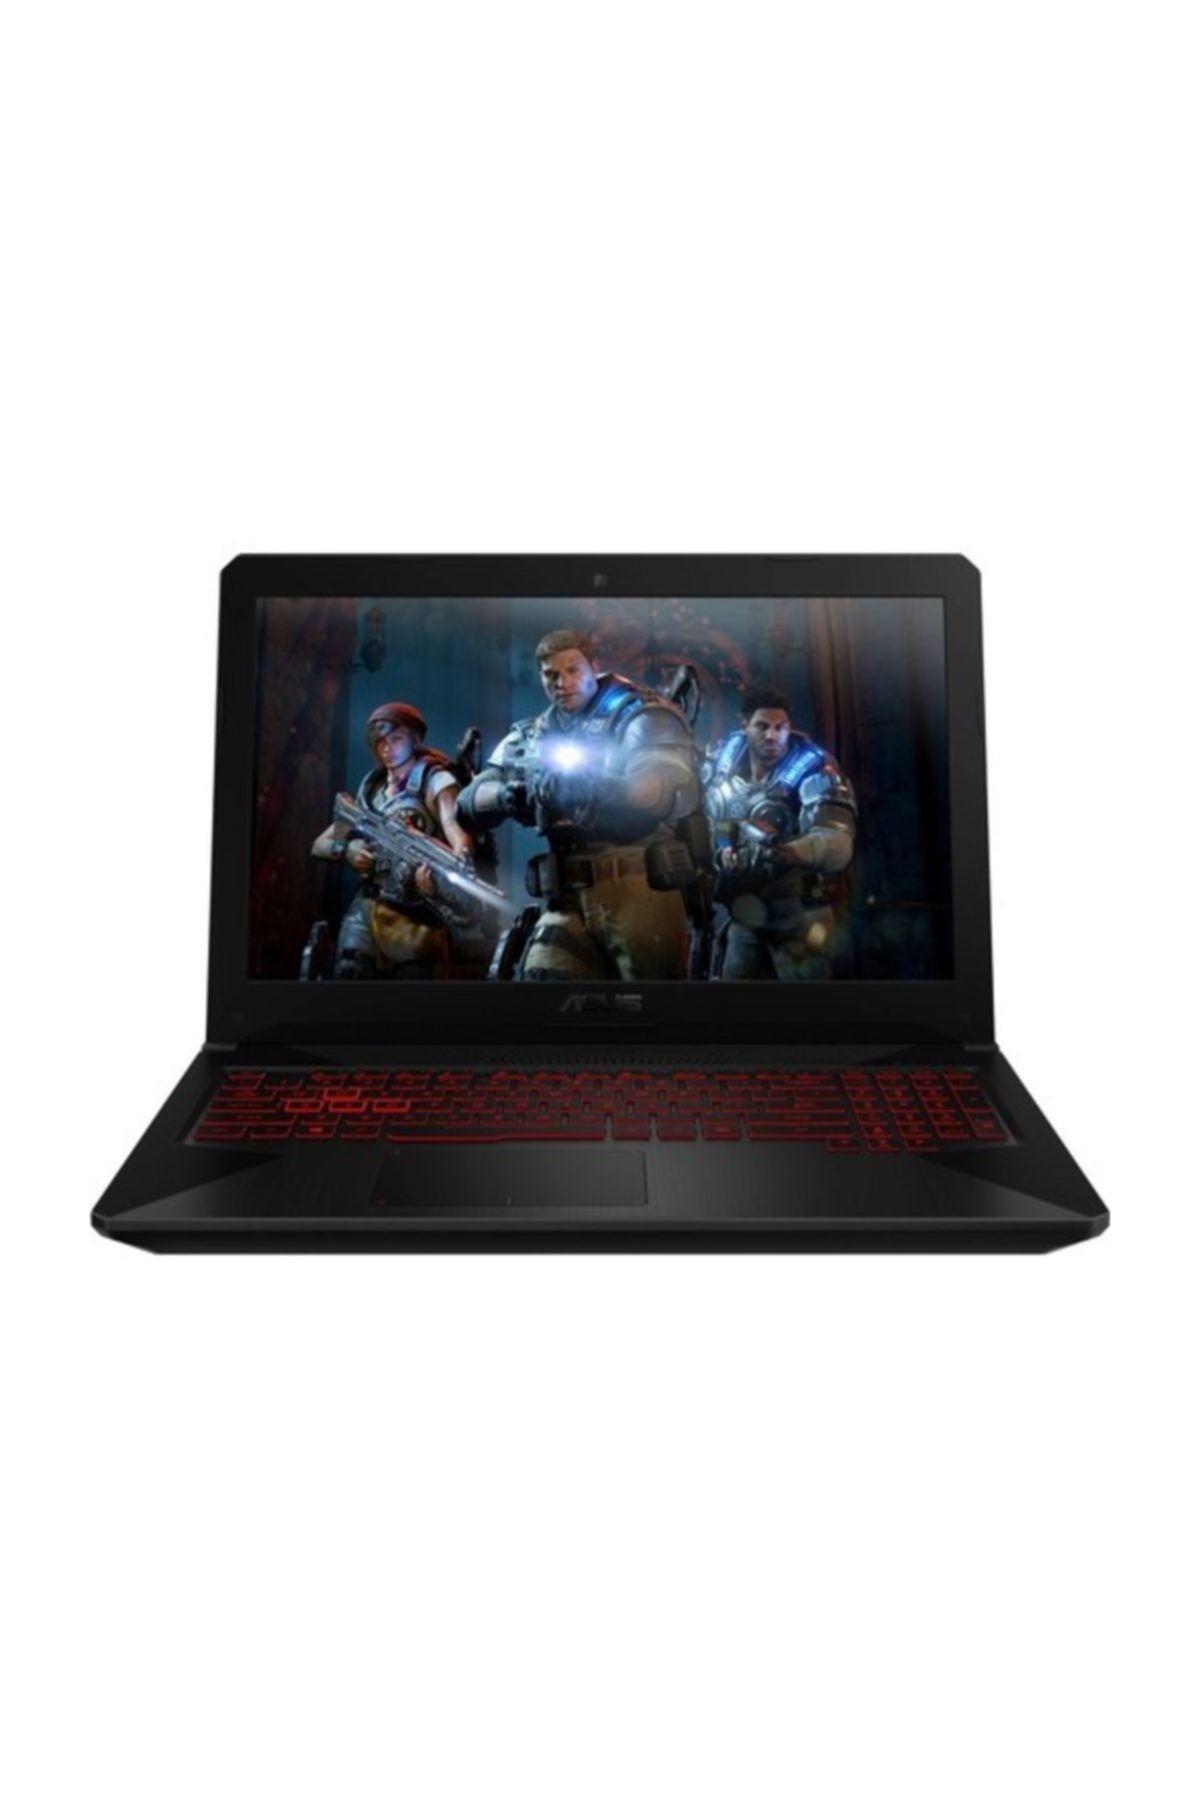 ASUS FX504GD-78050 Intel Core i7 8750H 2.2GHz 8GB 1TB 4GB GTX1050 15.6'' Full HD FreeDOS Gaming Notebook